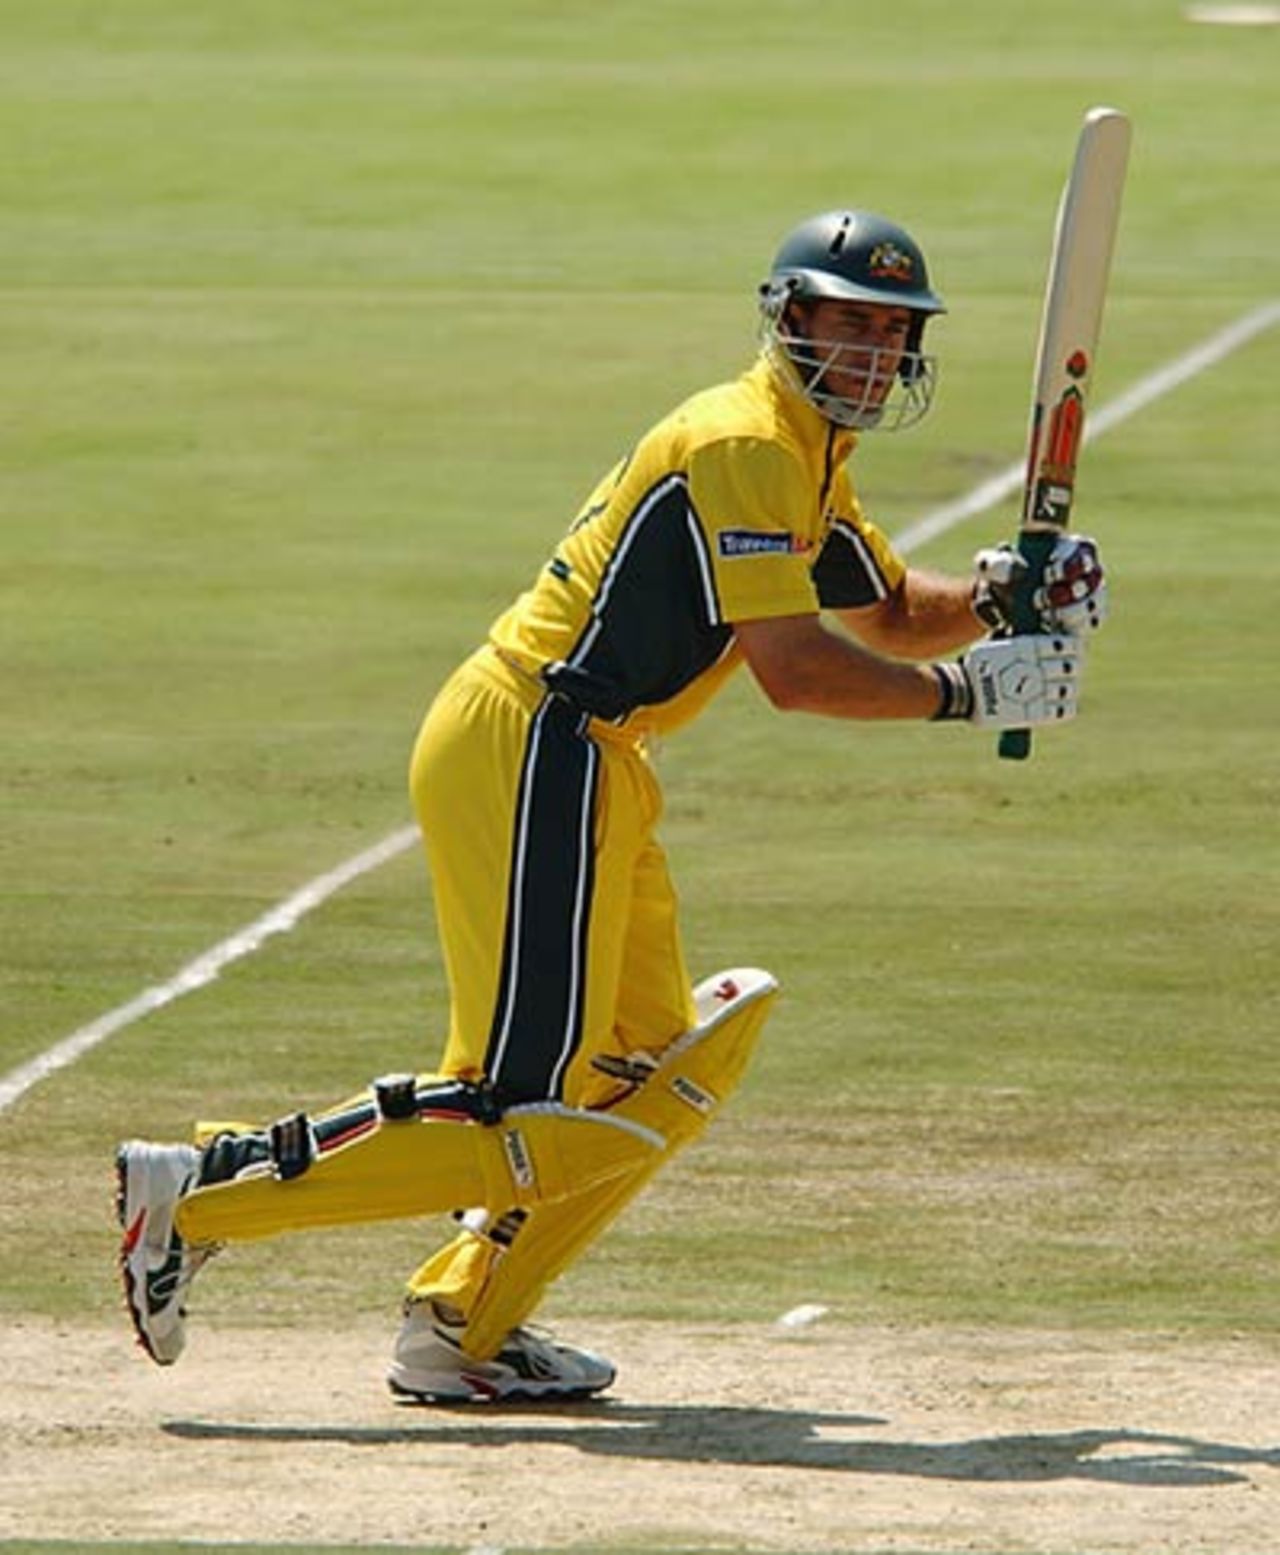 Michael Bevan in action during the World Cup, February 2003